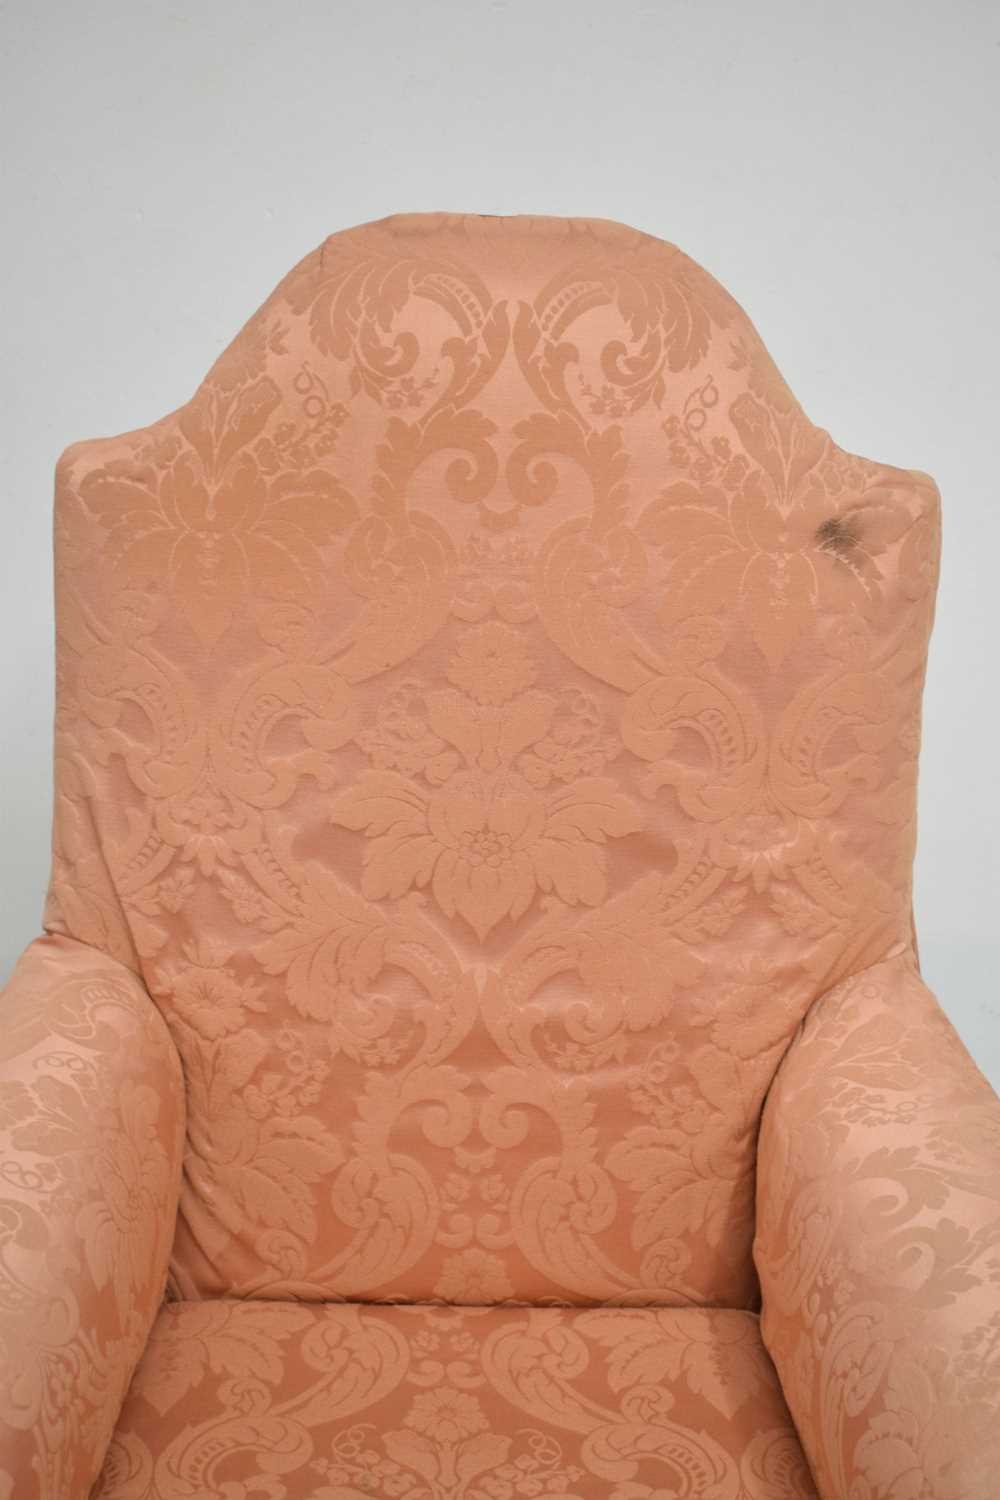 French carved walnut armchair, 18th century taste - Image 2 of 15